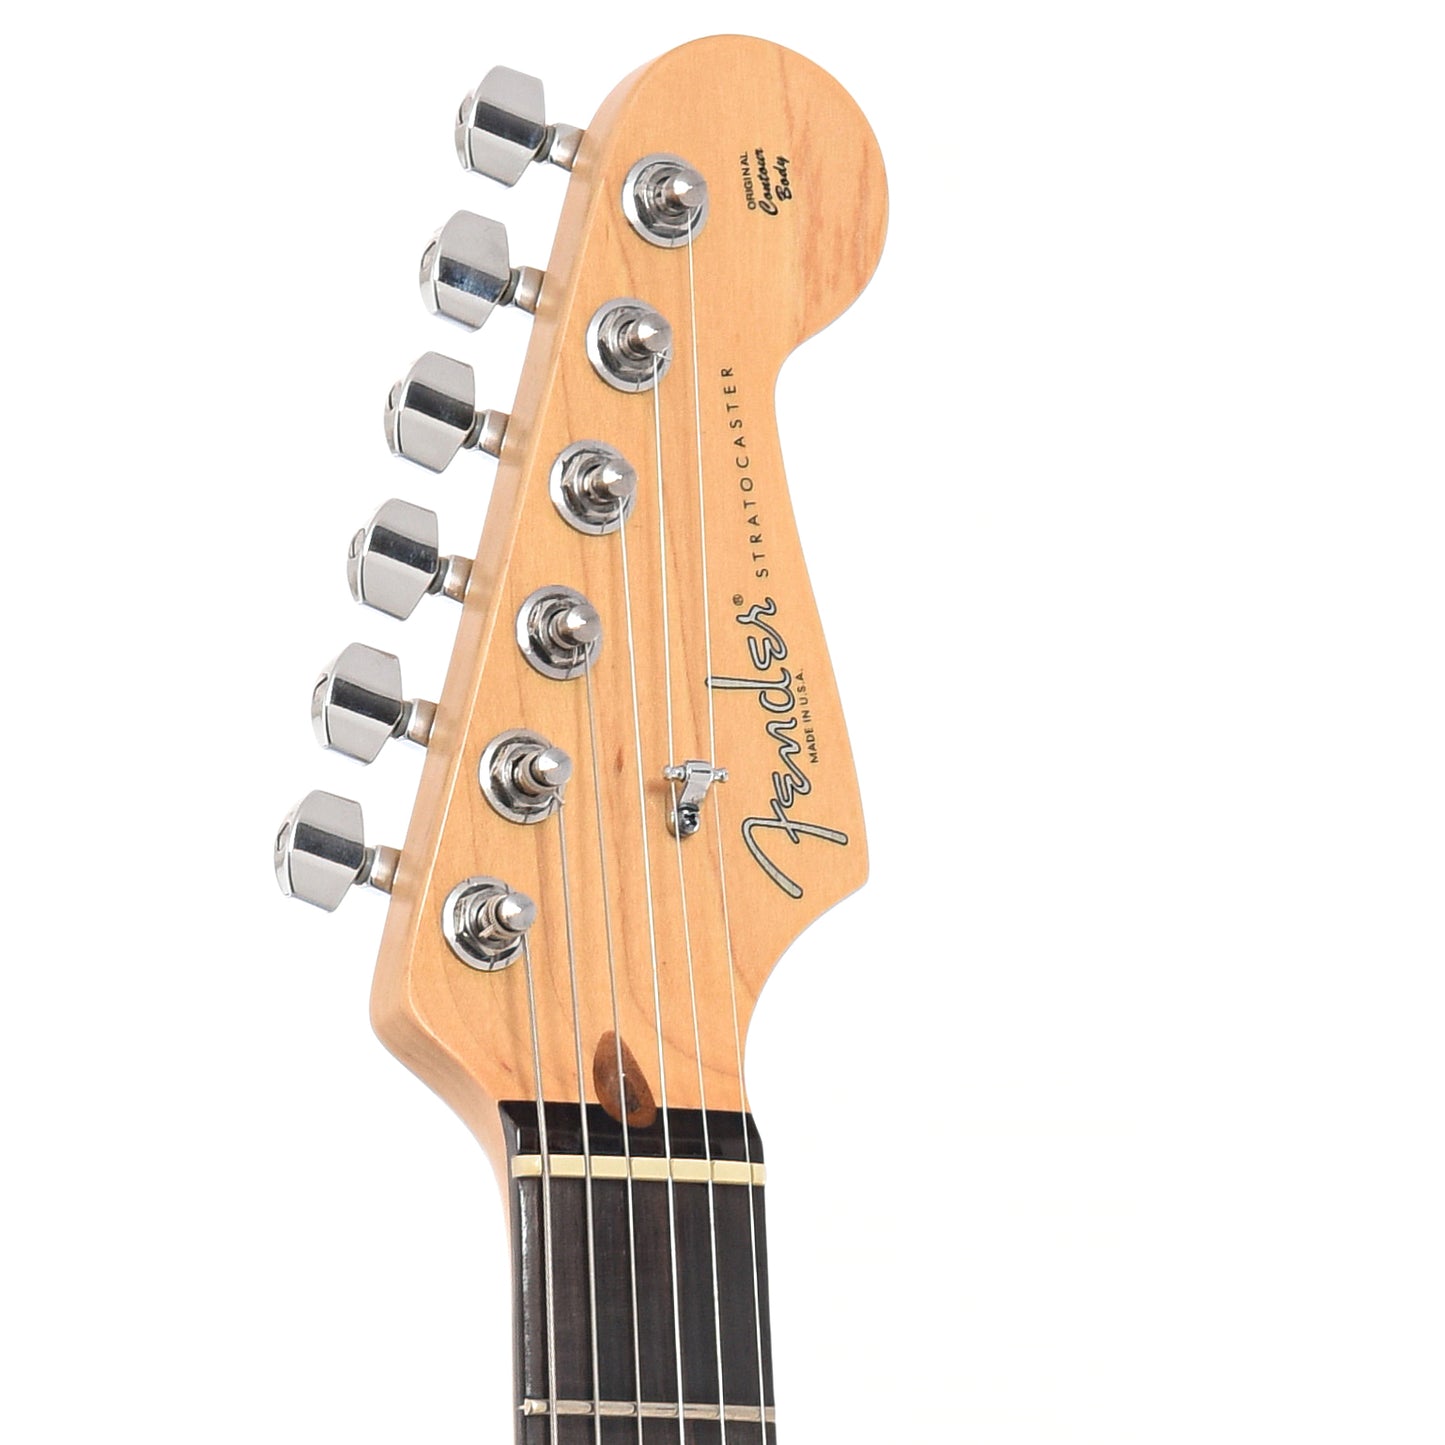 Headstock of Fender New American Standard Stratocaster Electric Guitar